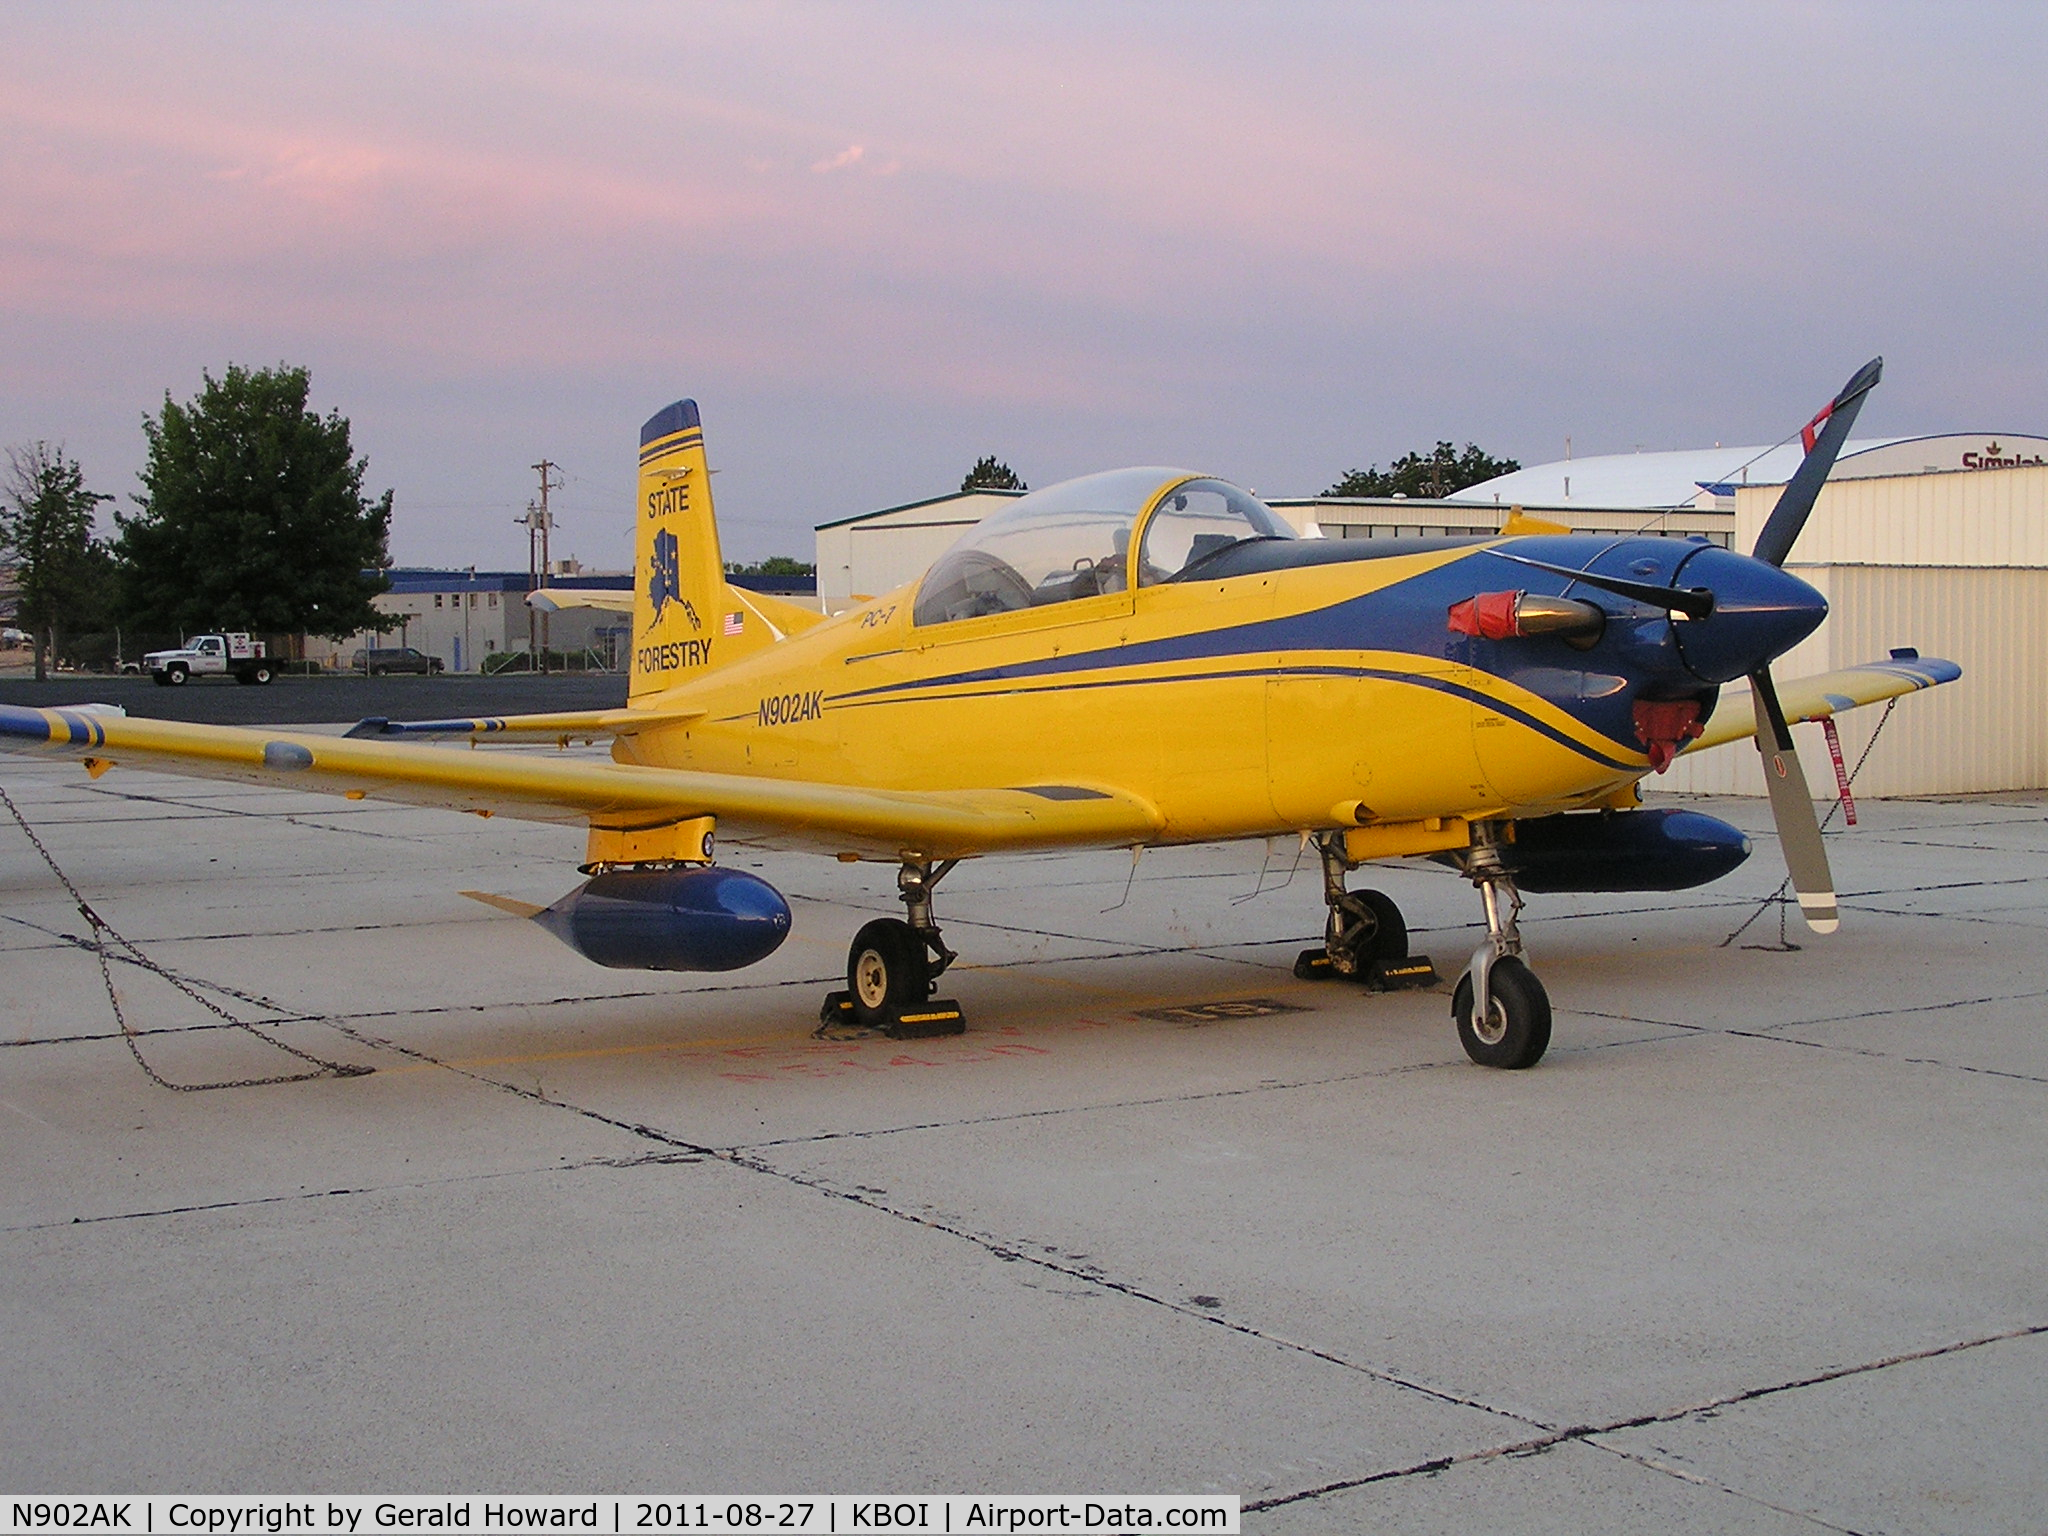 N902AK, 1988 Pilatus PC-7 Mk.II C/N 560, Did belong to the State of Alaska. Later sold to a private owner.